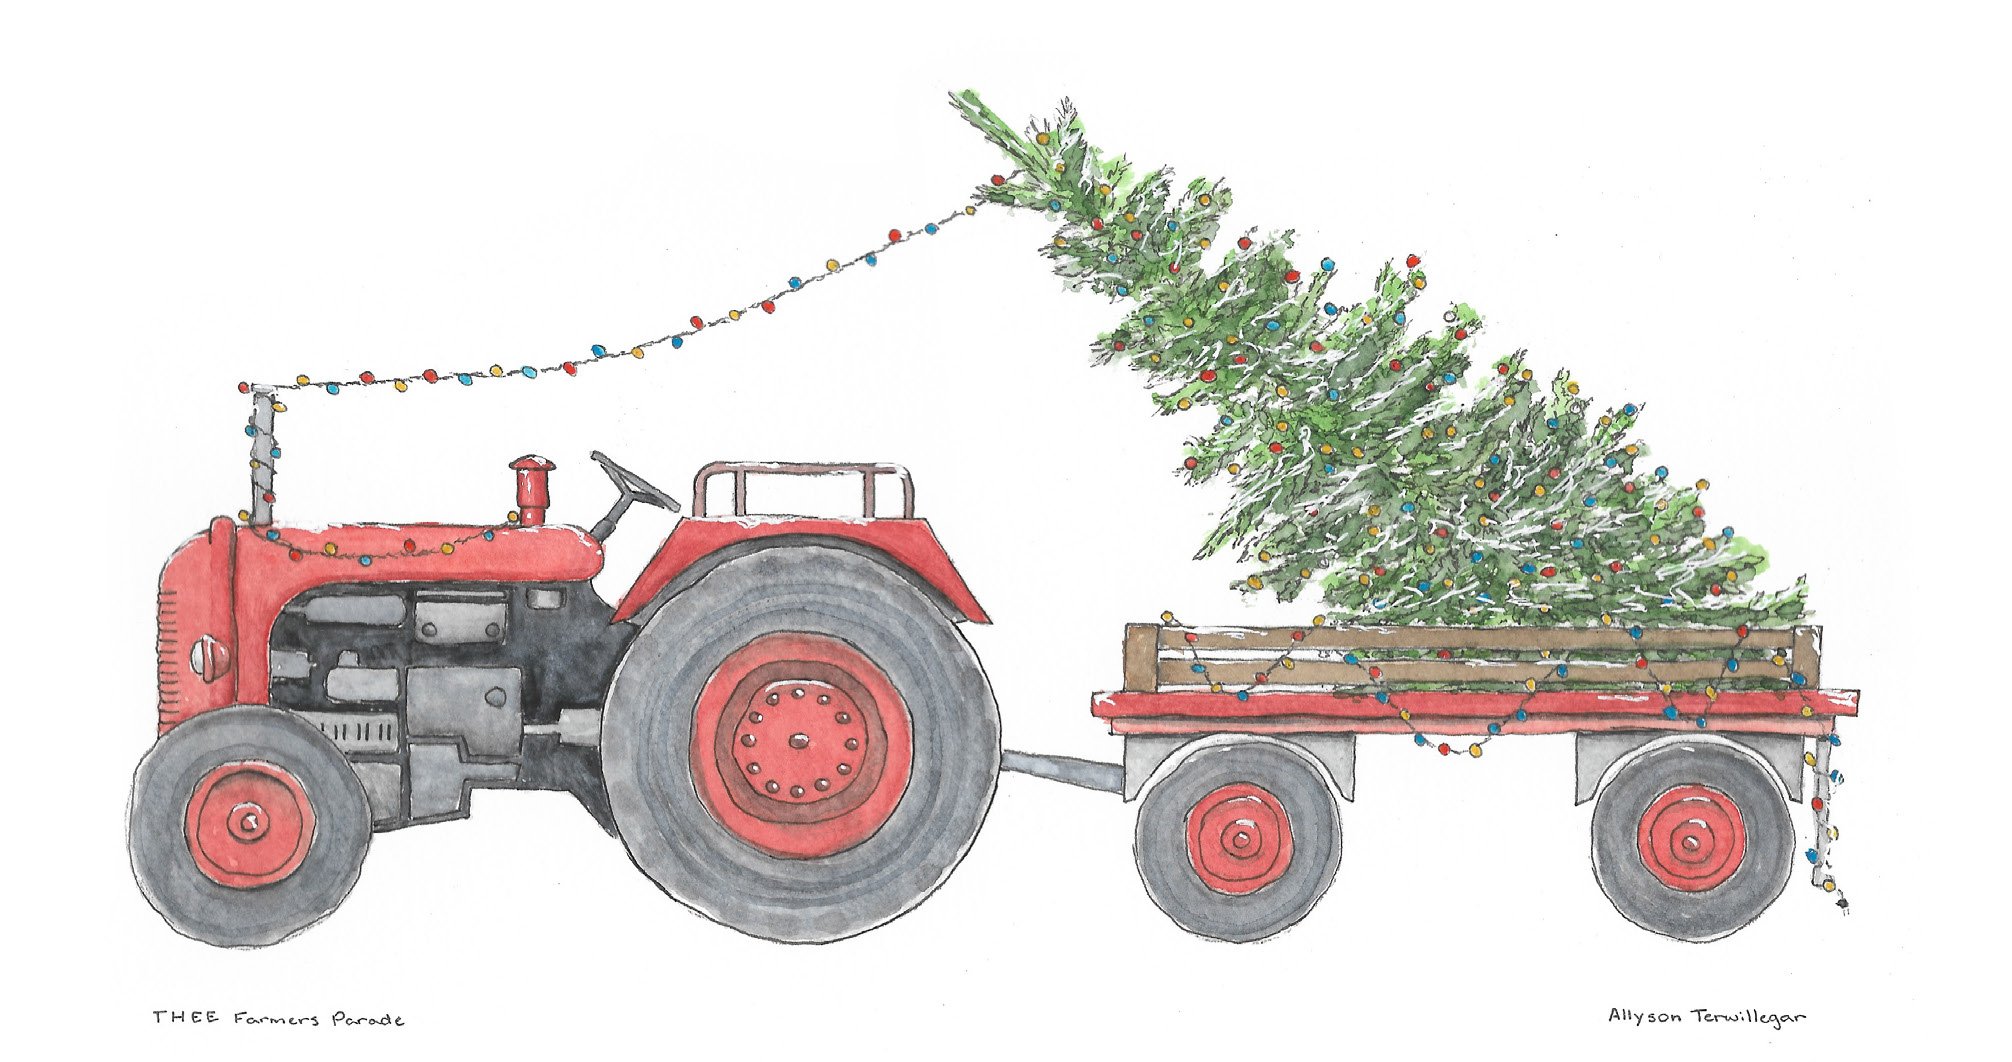 Illustration of a holiday decorated tractor